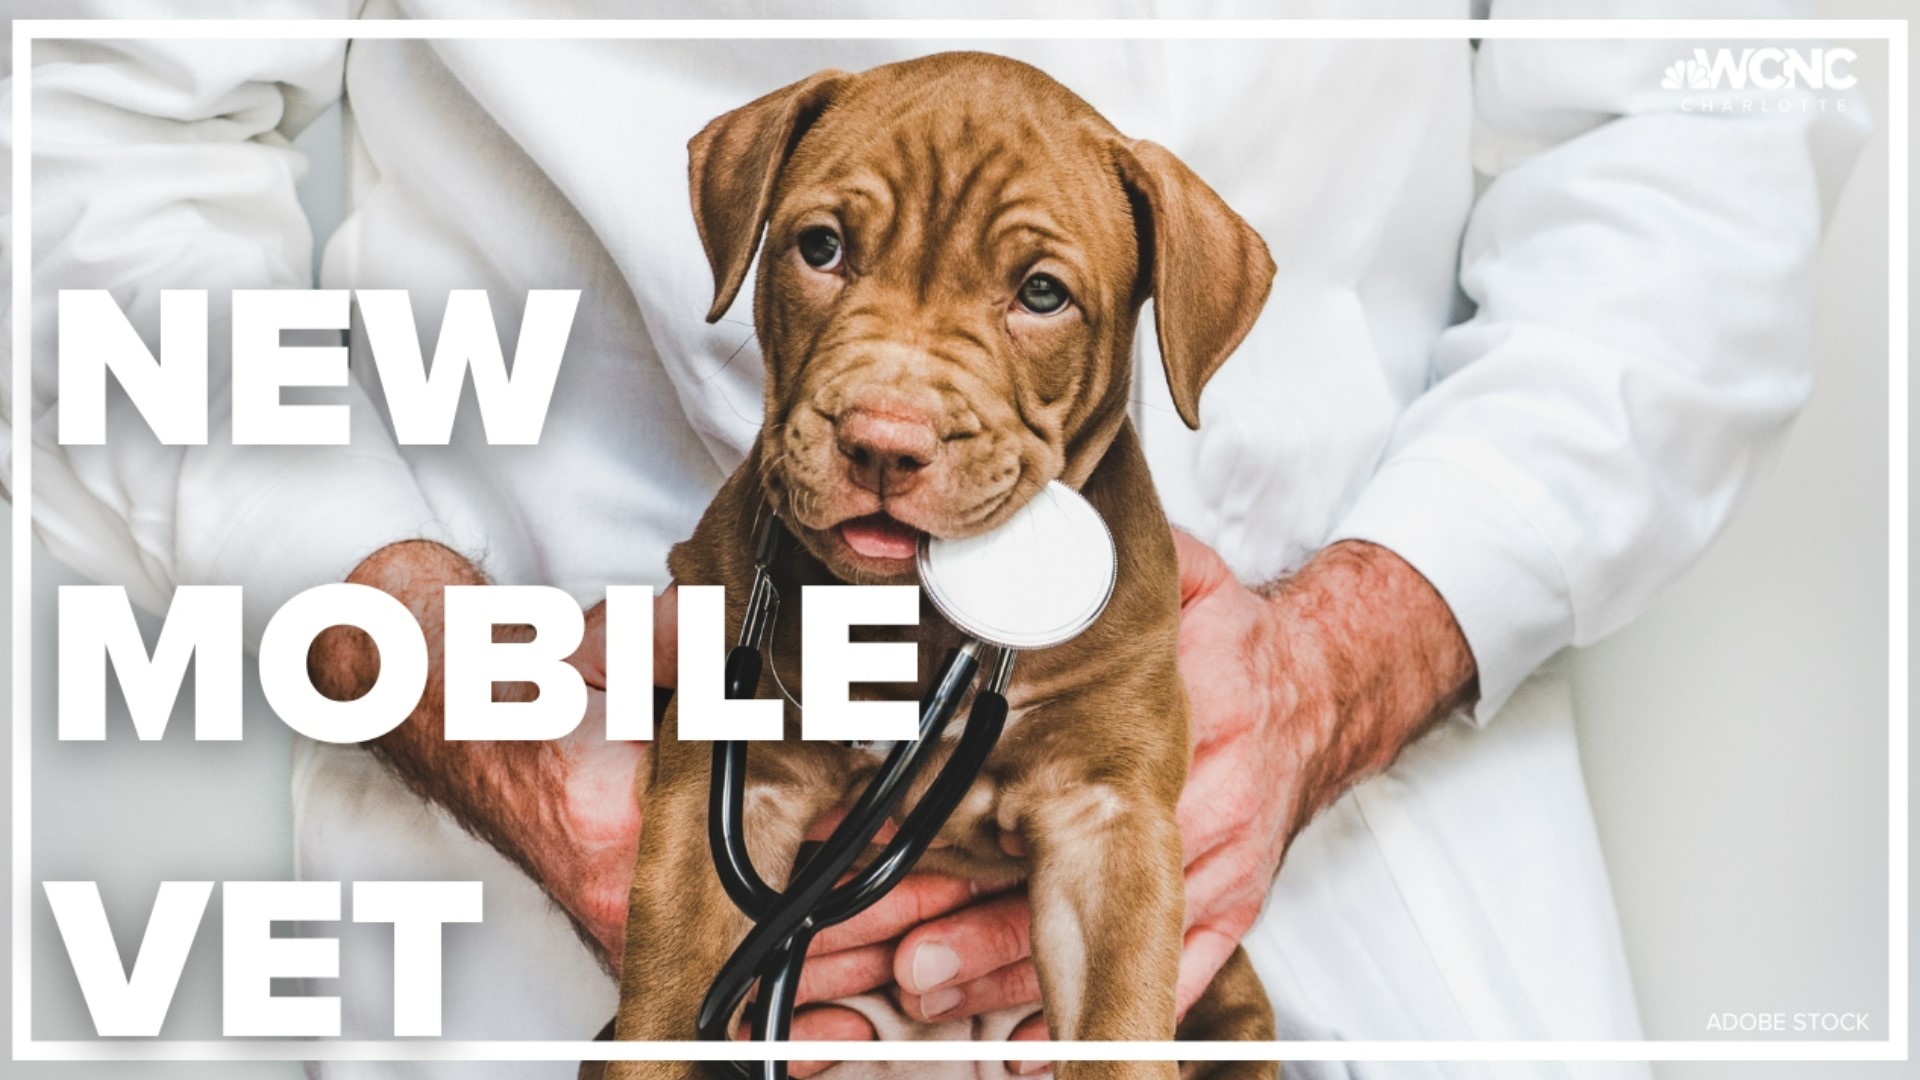 A new mobile veterinarian company is seeking solutions to understaffed animal clinics and overwhelmed vets struggling with burnout.